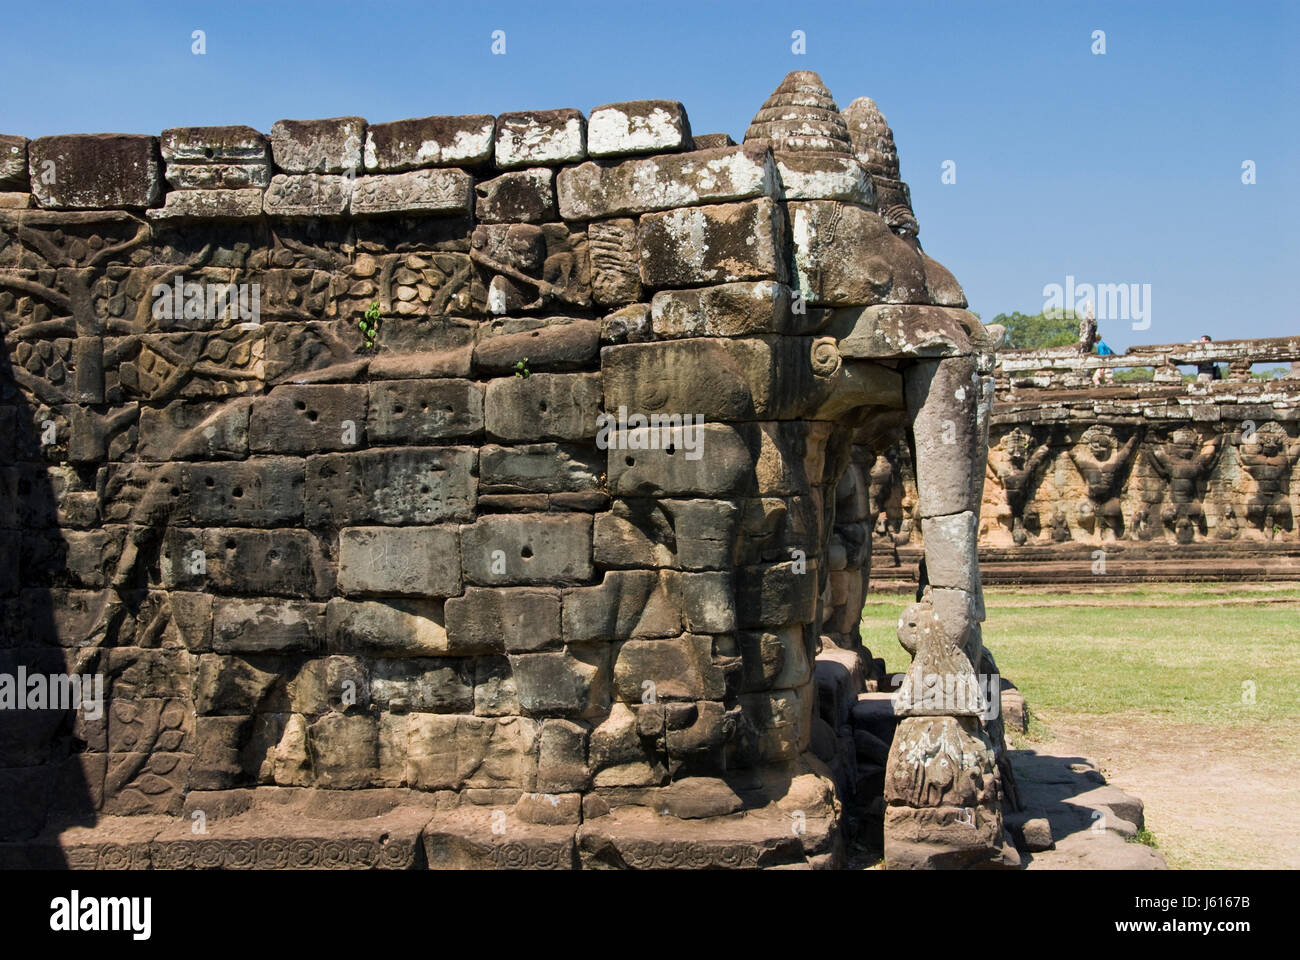 The Terrace of the Elephants at Angkor Thom was a 350m-long reviewing platform for the king to review his army, Angkor, Cambodia. Stock Photo